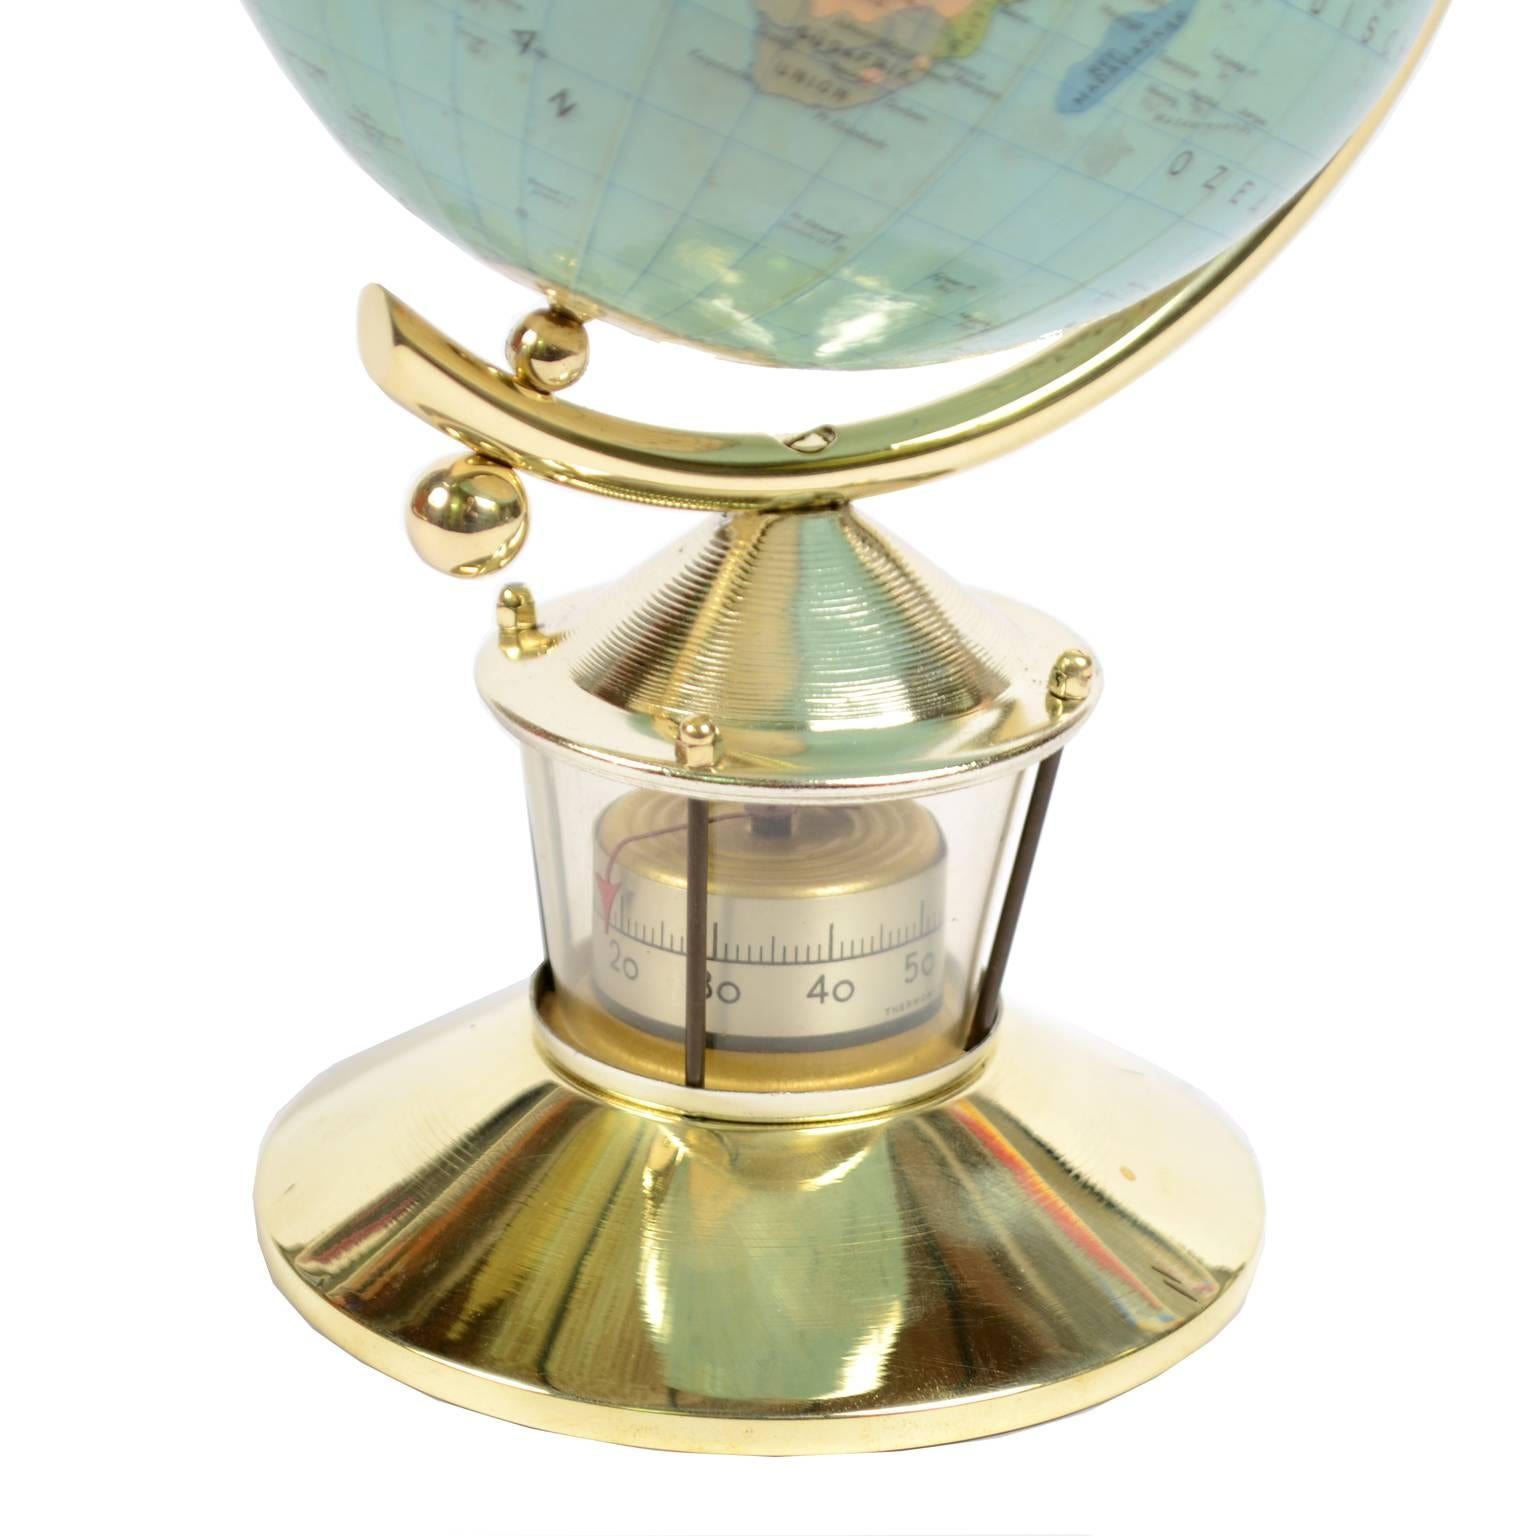 Small Flemmings Verlag Hamburg globe papier mâché covered with paper, brass base with meridian circle and thermometer, 1950s. Very good condition. Measures: Height cm 23, sphere diameter cm 12.